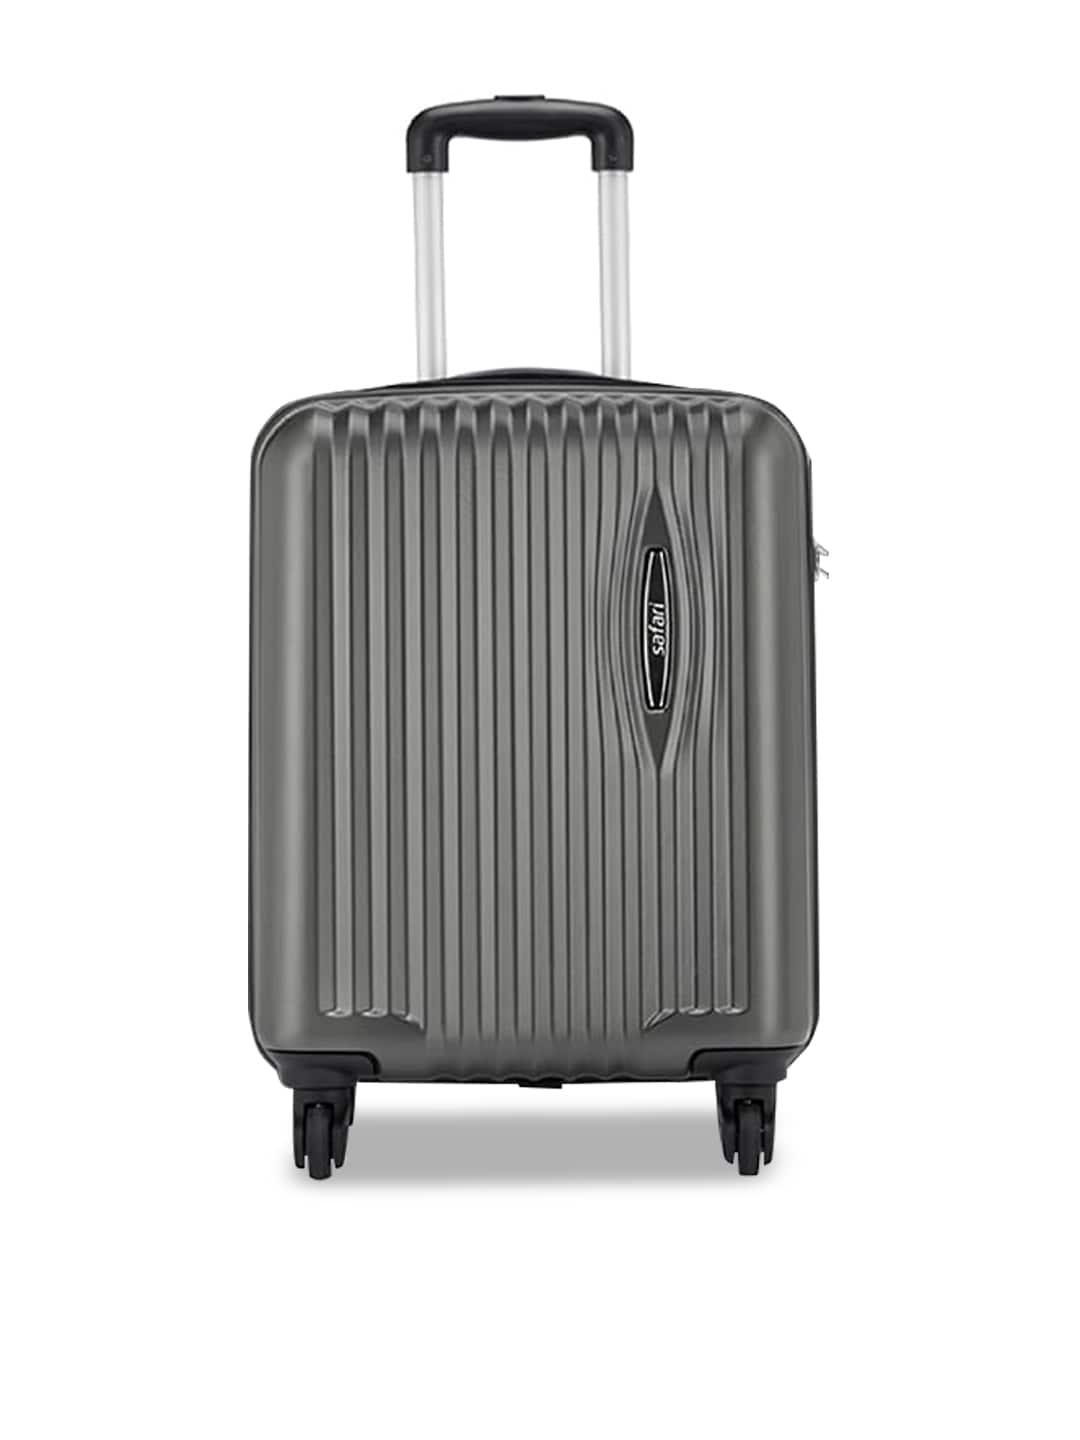 Safari Set of 3 Charcoal Grey Textured 360-Degree Rotation Hard-Sided Trolley Suitcases Price in India